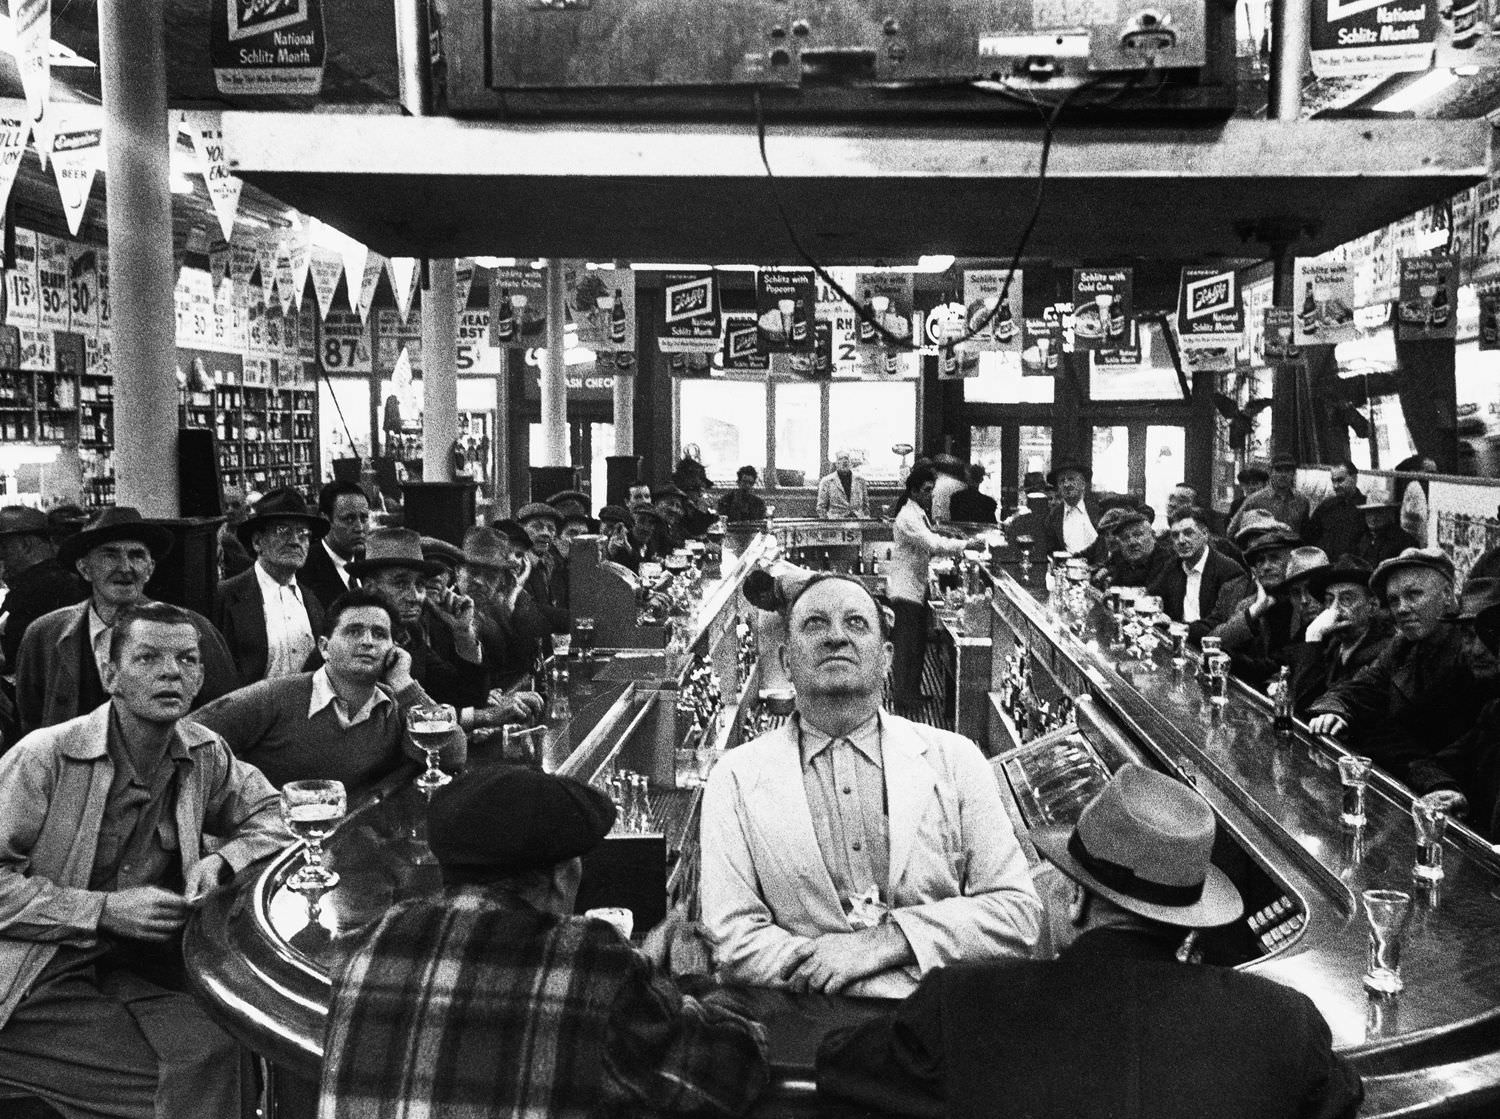 A rapt audience in a Chicago bar watches the 1952 Subway Series between the Yankees and Dodgers in 1952. New York won in seven games.